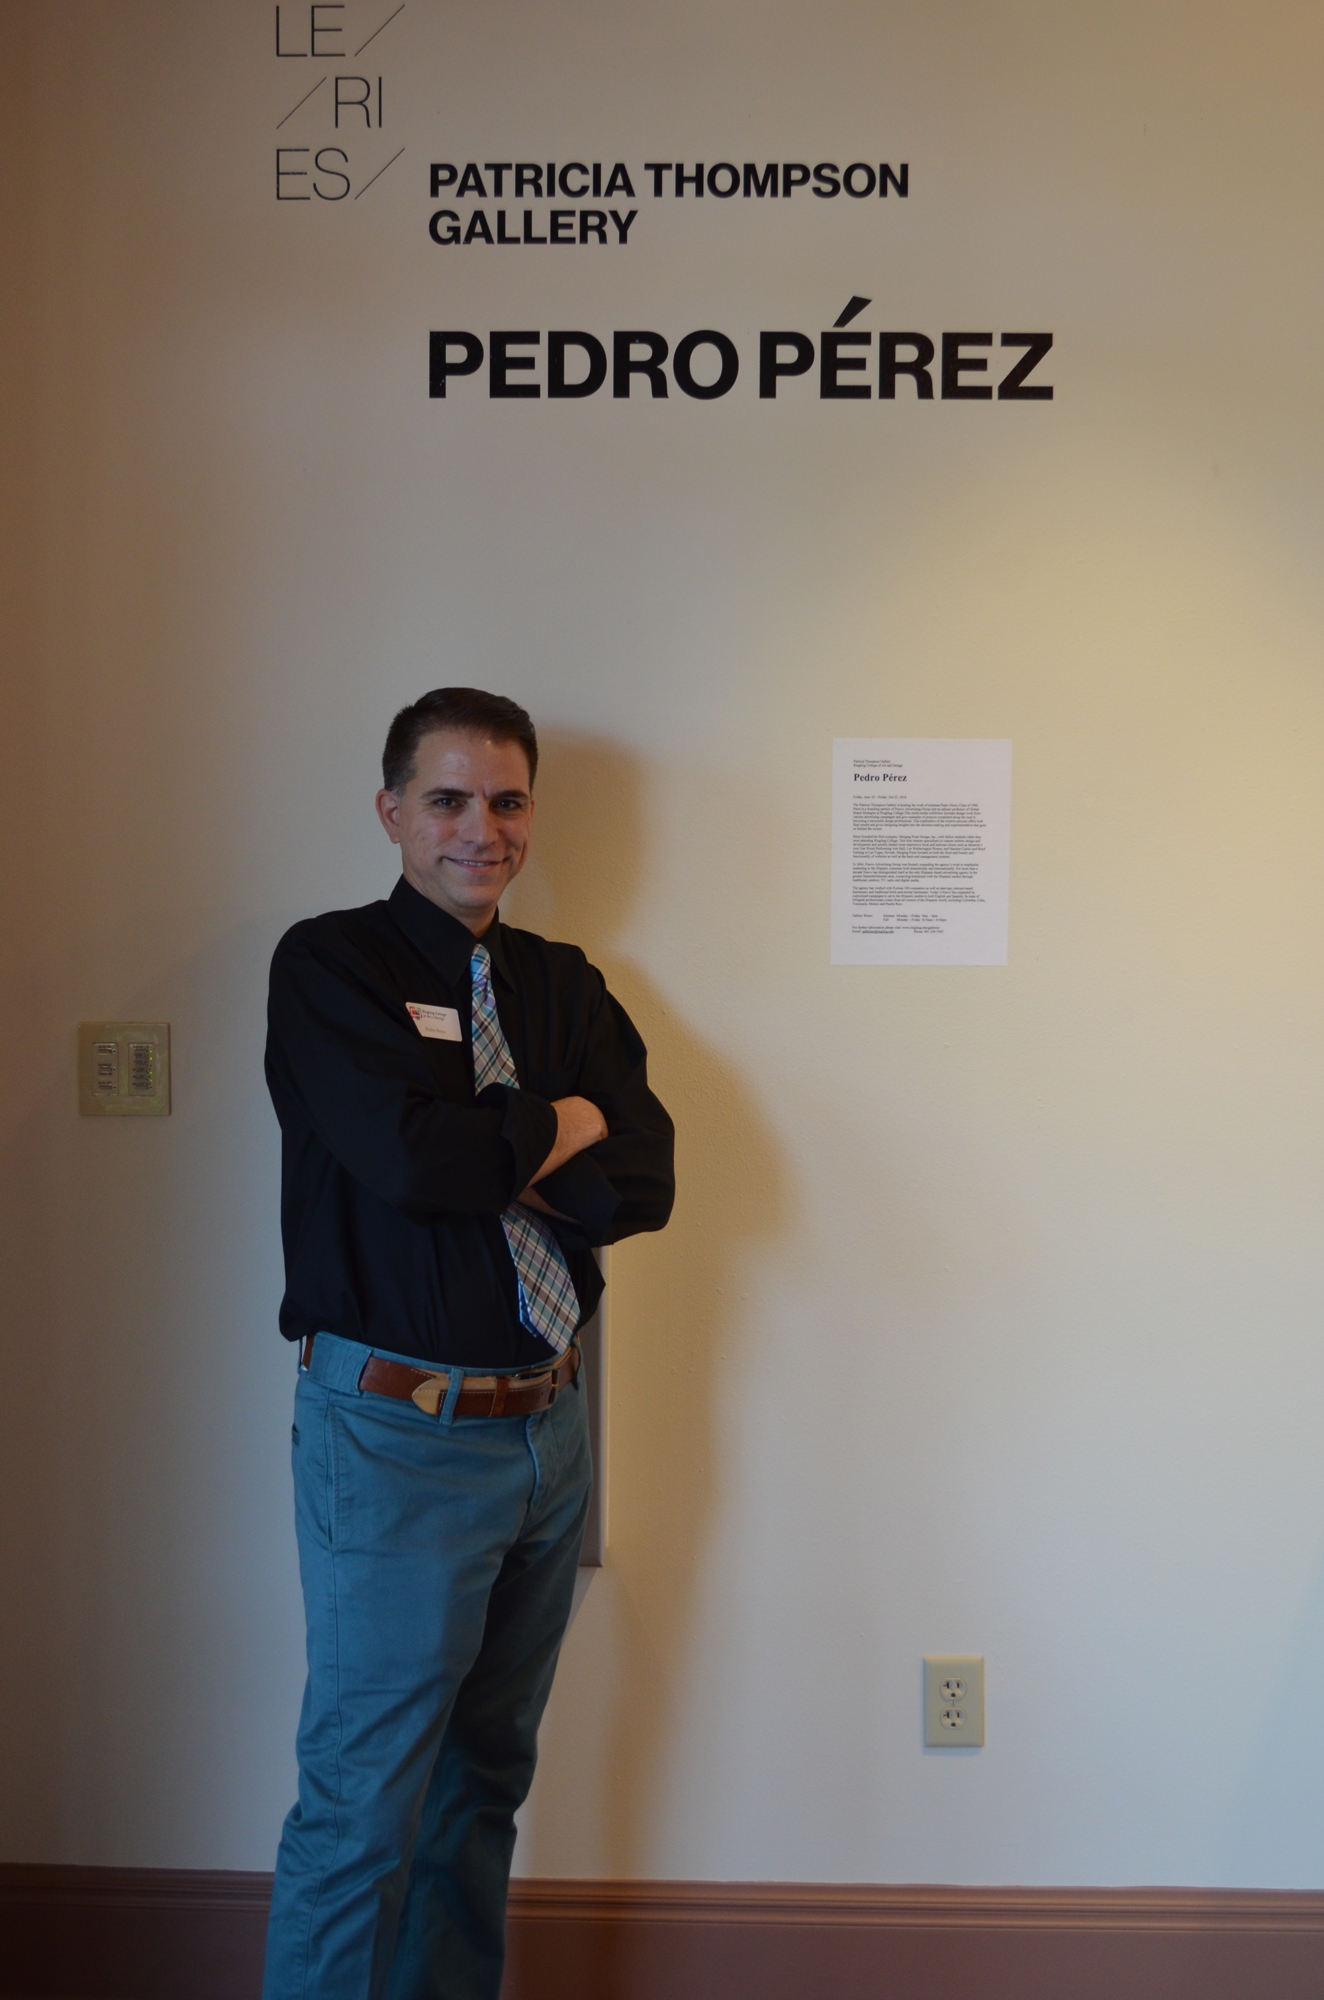 Pedro Pérez poses by the entrance to his exhibit in the Patricia Thompson Gallery at Ringling College of Art and Design.